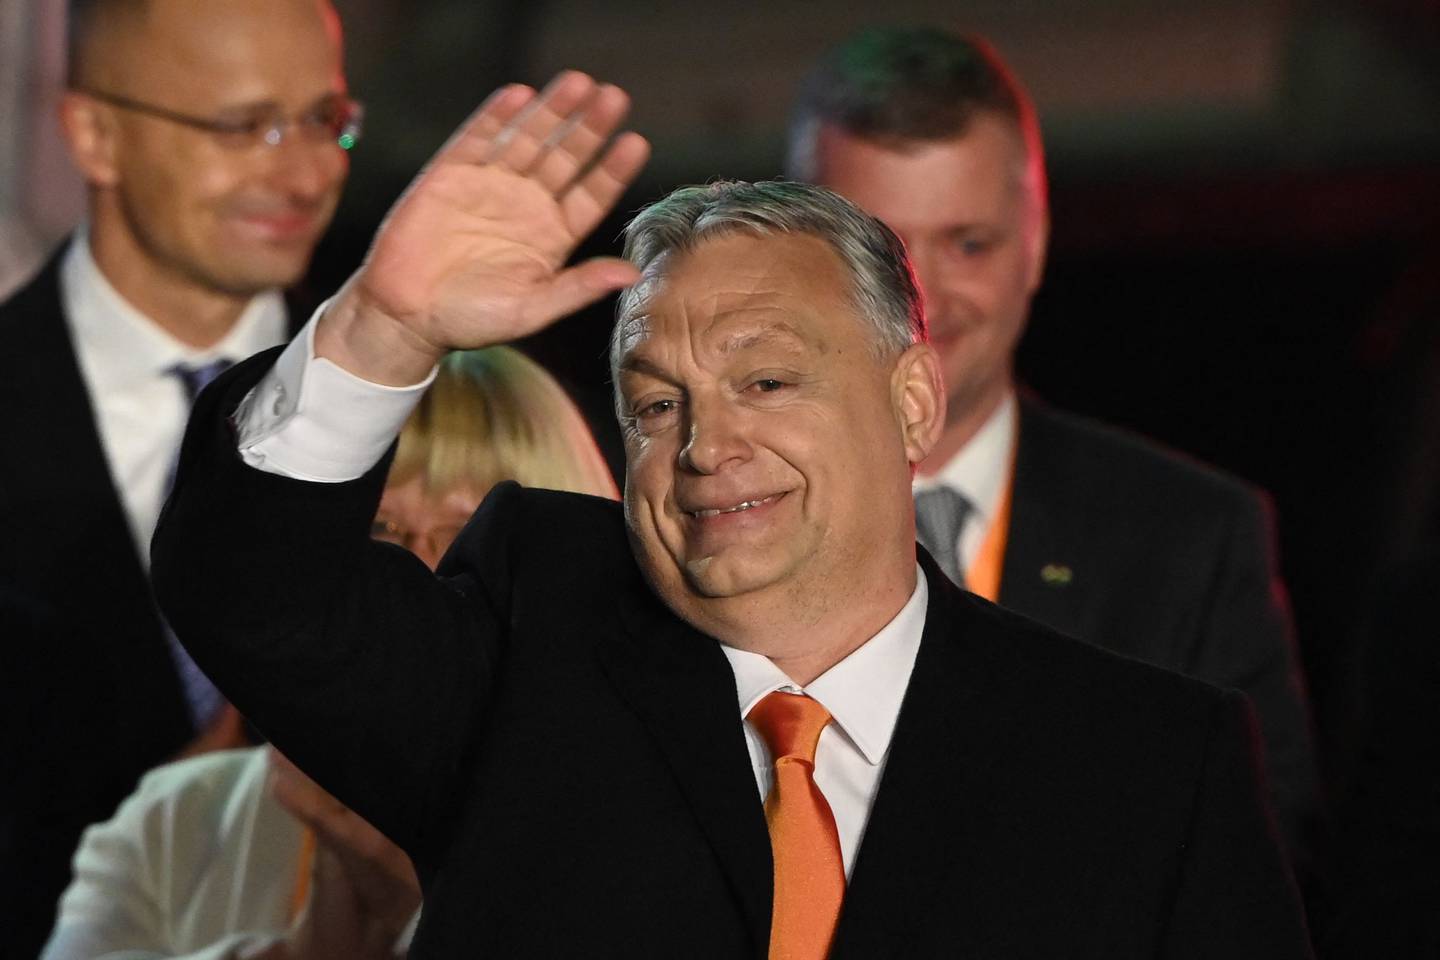 (FILES) Hungarian Prime Minister Viktor Orban and members of the Fidesz party celebrate on stage at their election base, 'Balna' building on the bank of the Danube River of Budapest, on April 3, 2022, after Orban claimed a 'great victory' in the general election, as partial results gave his Fidesz party the lead. The results of the recent elections in Poland could have given a glimmer of hope for Hungarians longing for a change. Both European Union member states were widely accused of sliding into authoritarianism, and observers criticised them for having free, but not fair elections. Yet, the ideologically diverse Polish pro-EU parties have managed to triumph at the polls in late October. (Photo by Attila KISBENEDEK / AFP)